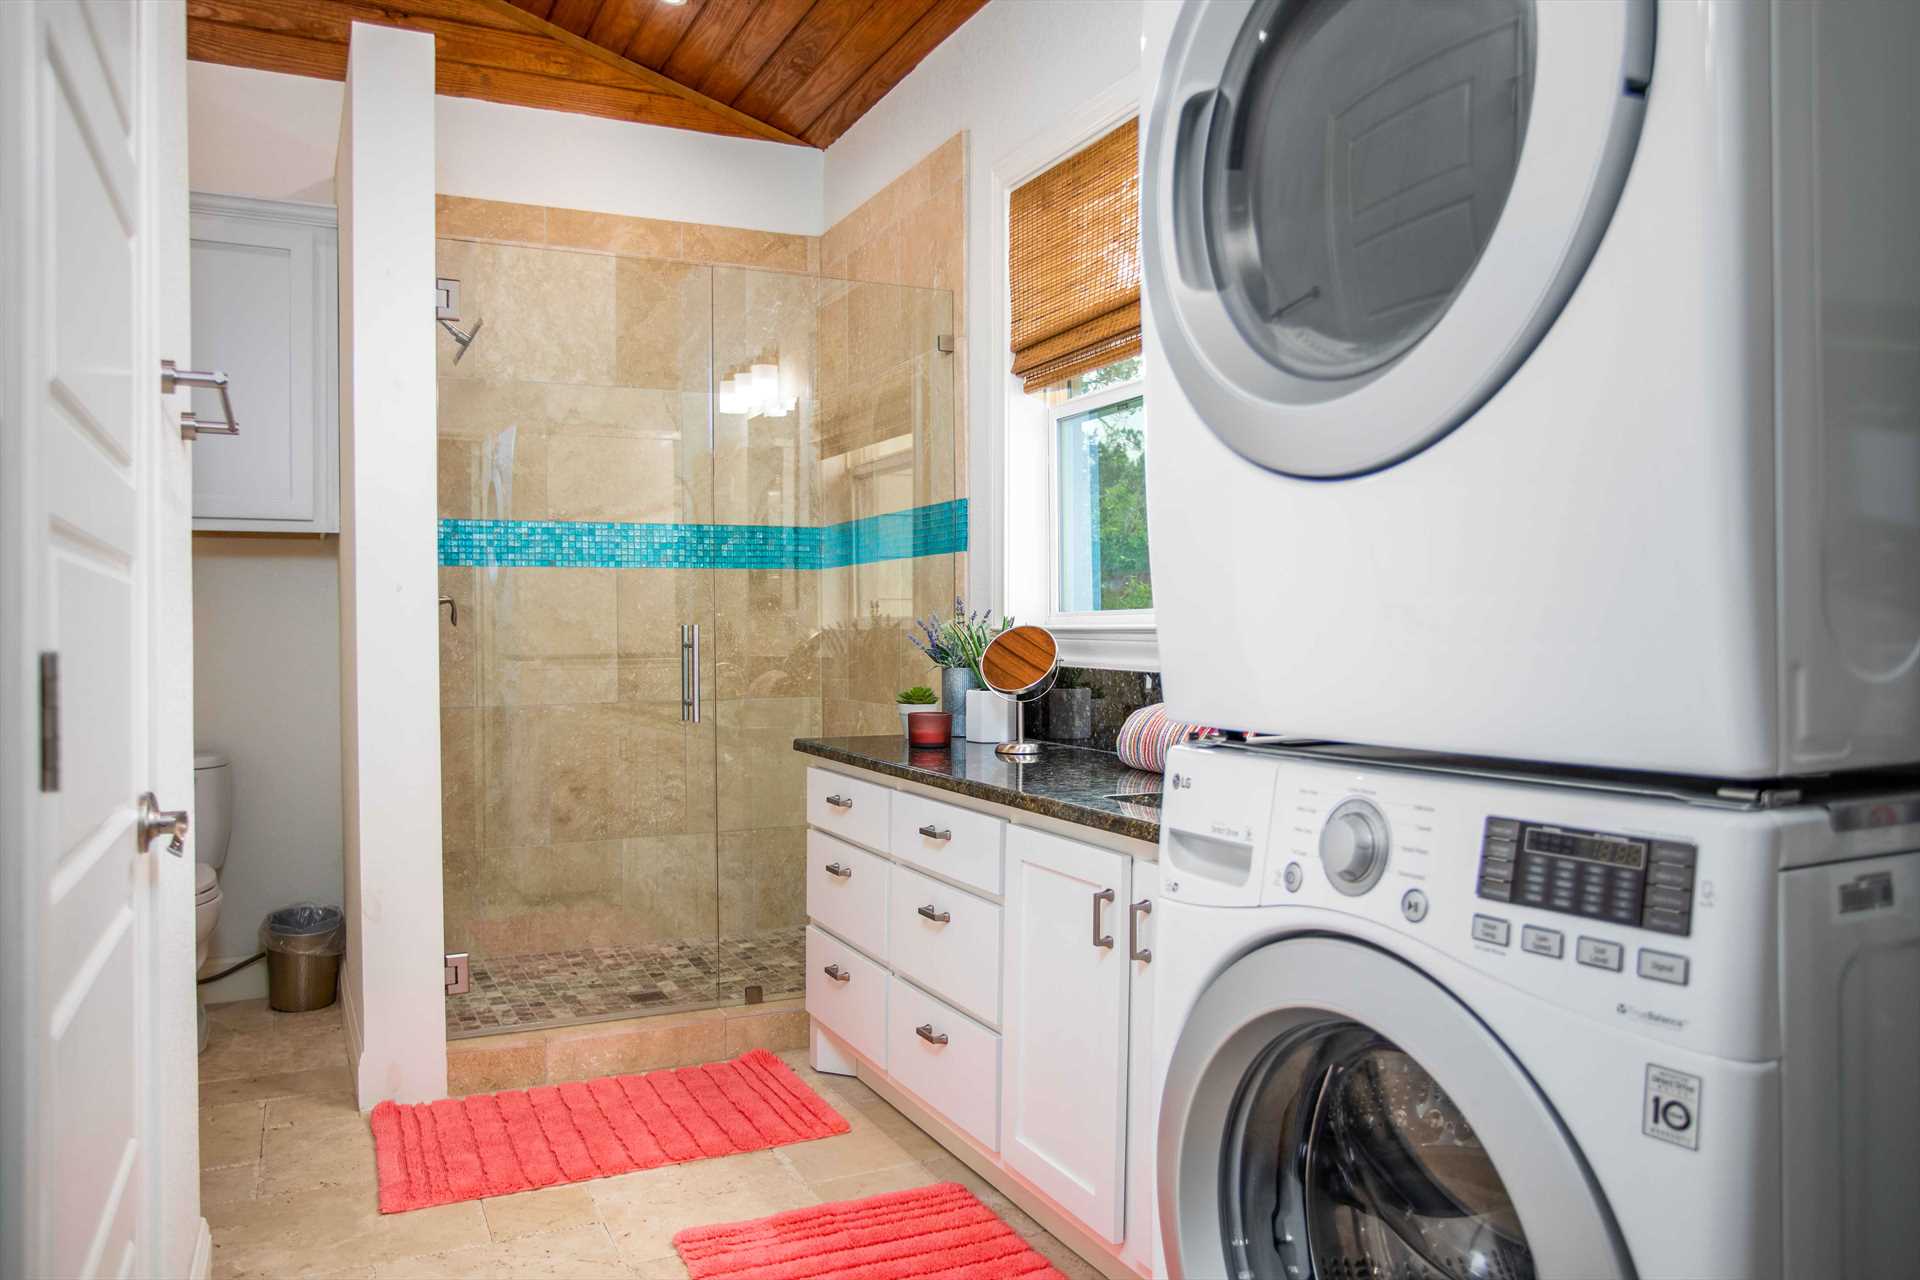                                                 Adjacent to the full bath is a utility room with a convenient washer and dryer!